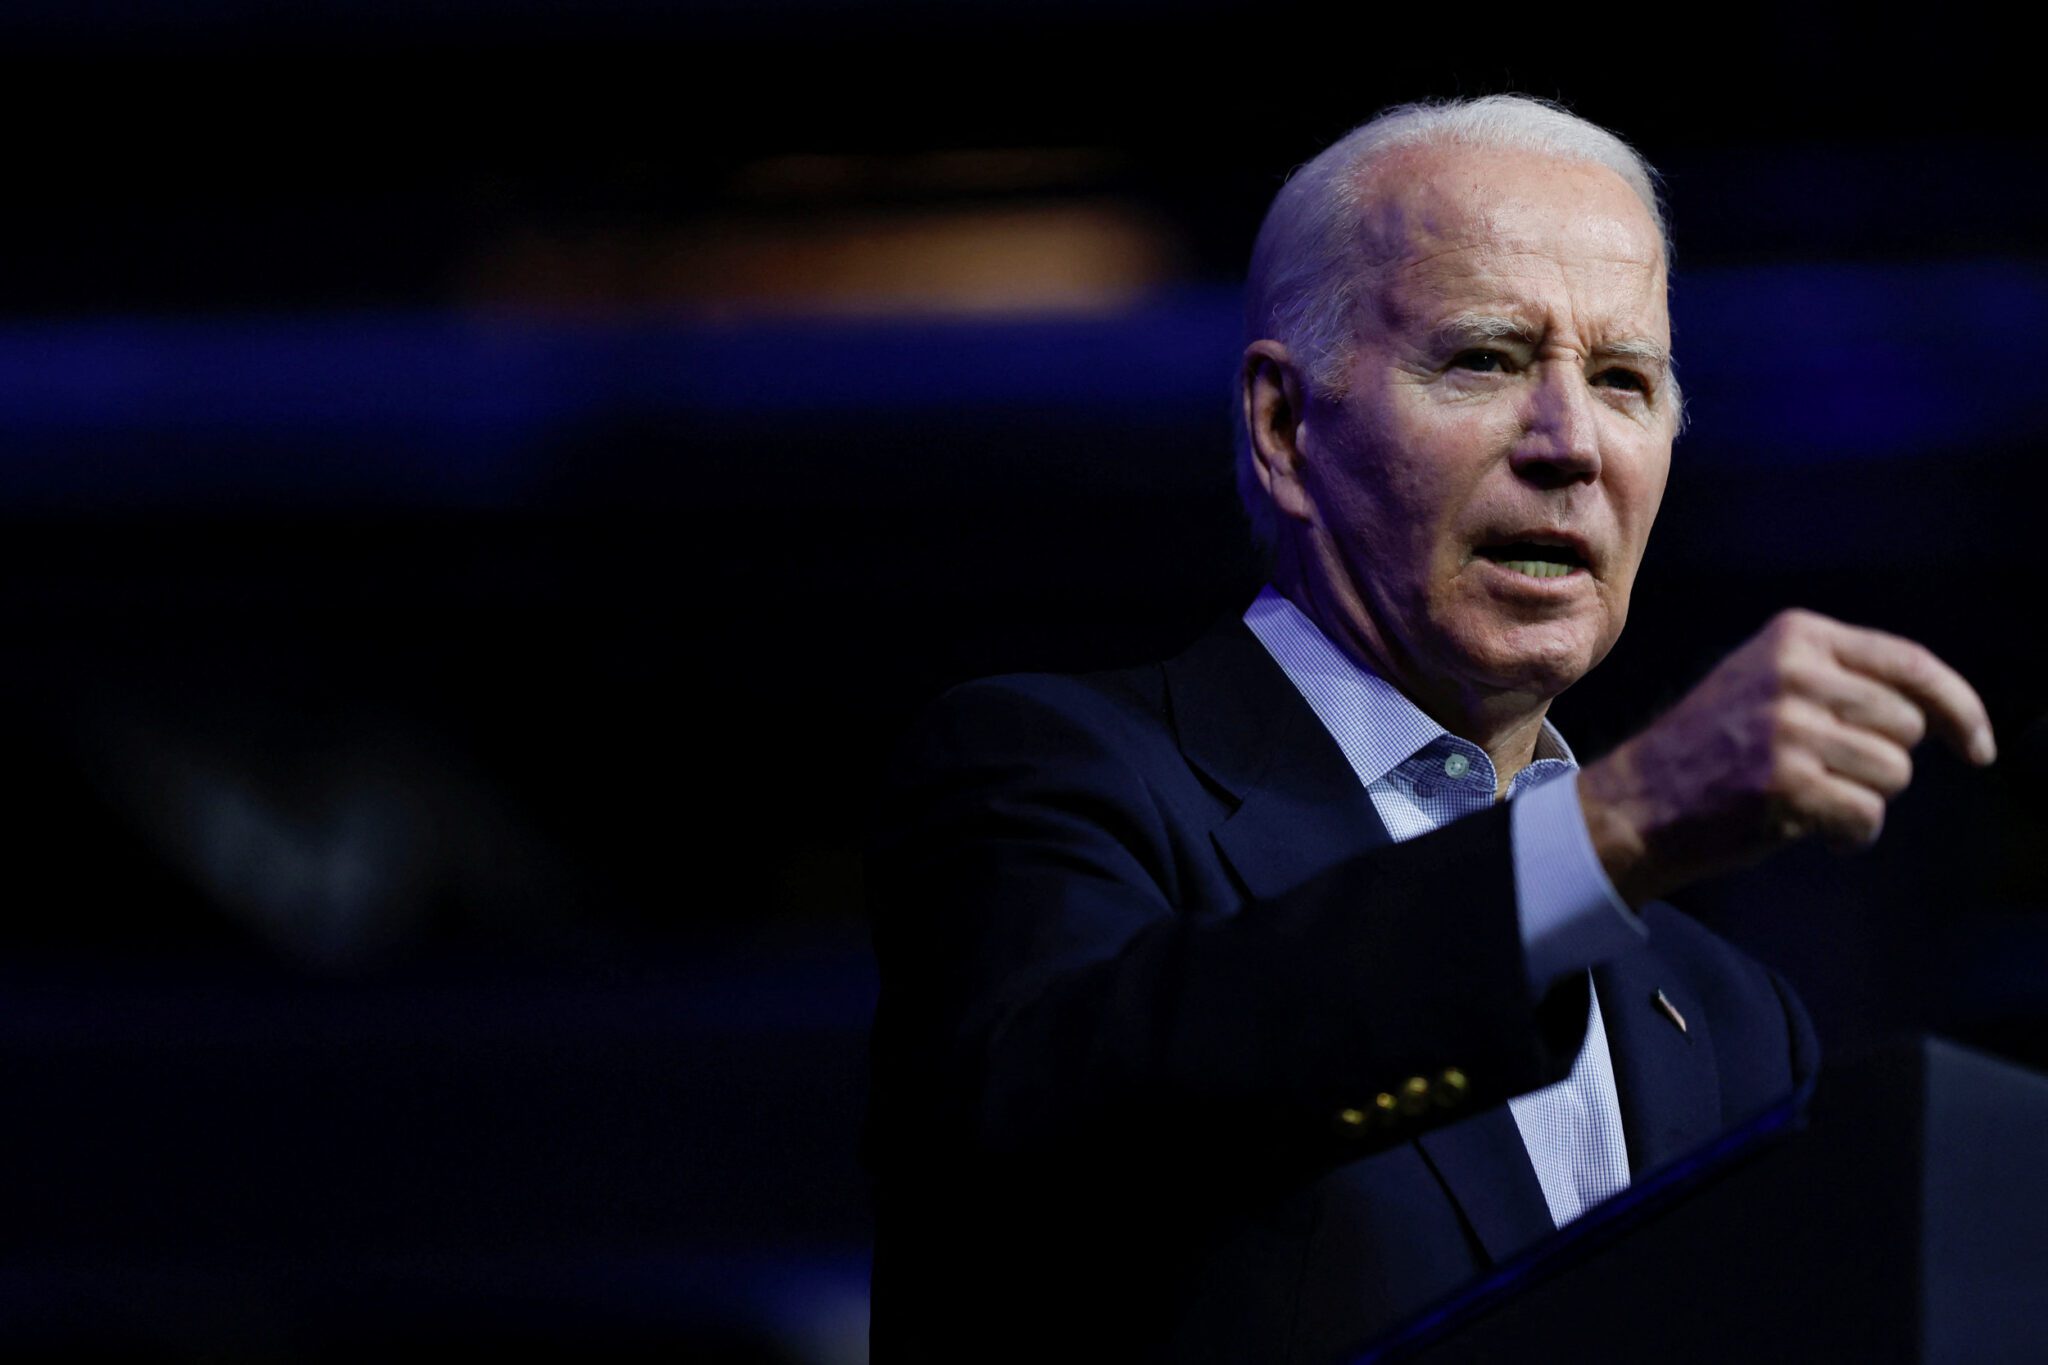 The senators asked the President Joe Biden administration to ban travel between the U.S. and China over concerns about an increase in respiratory illnesses in China. 